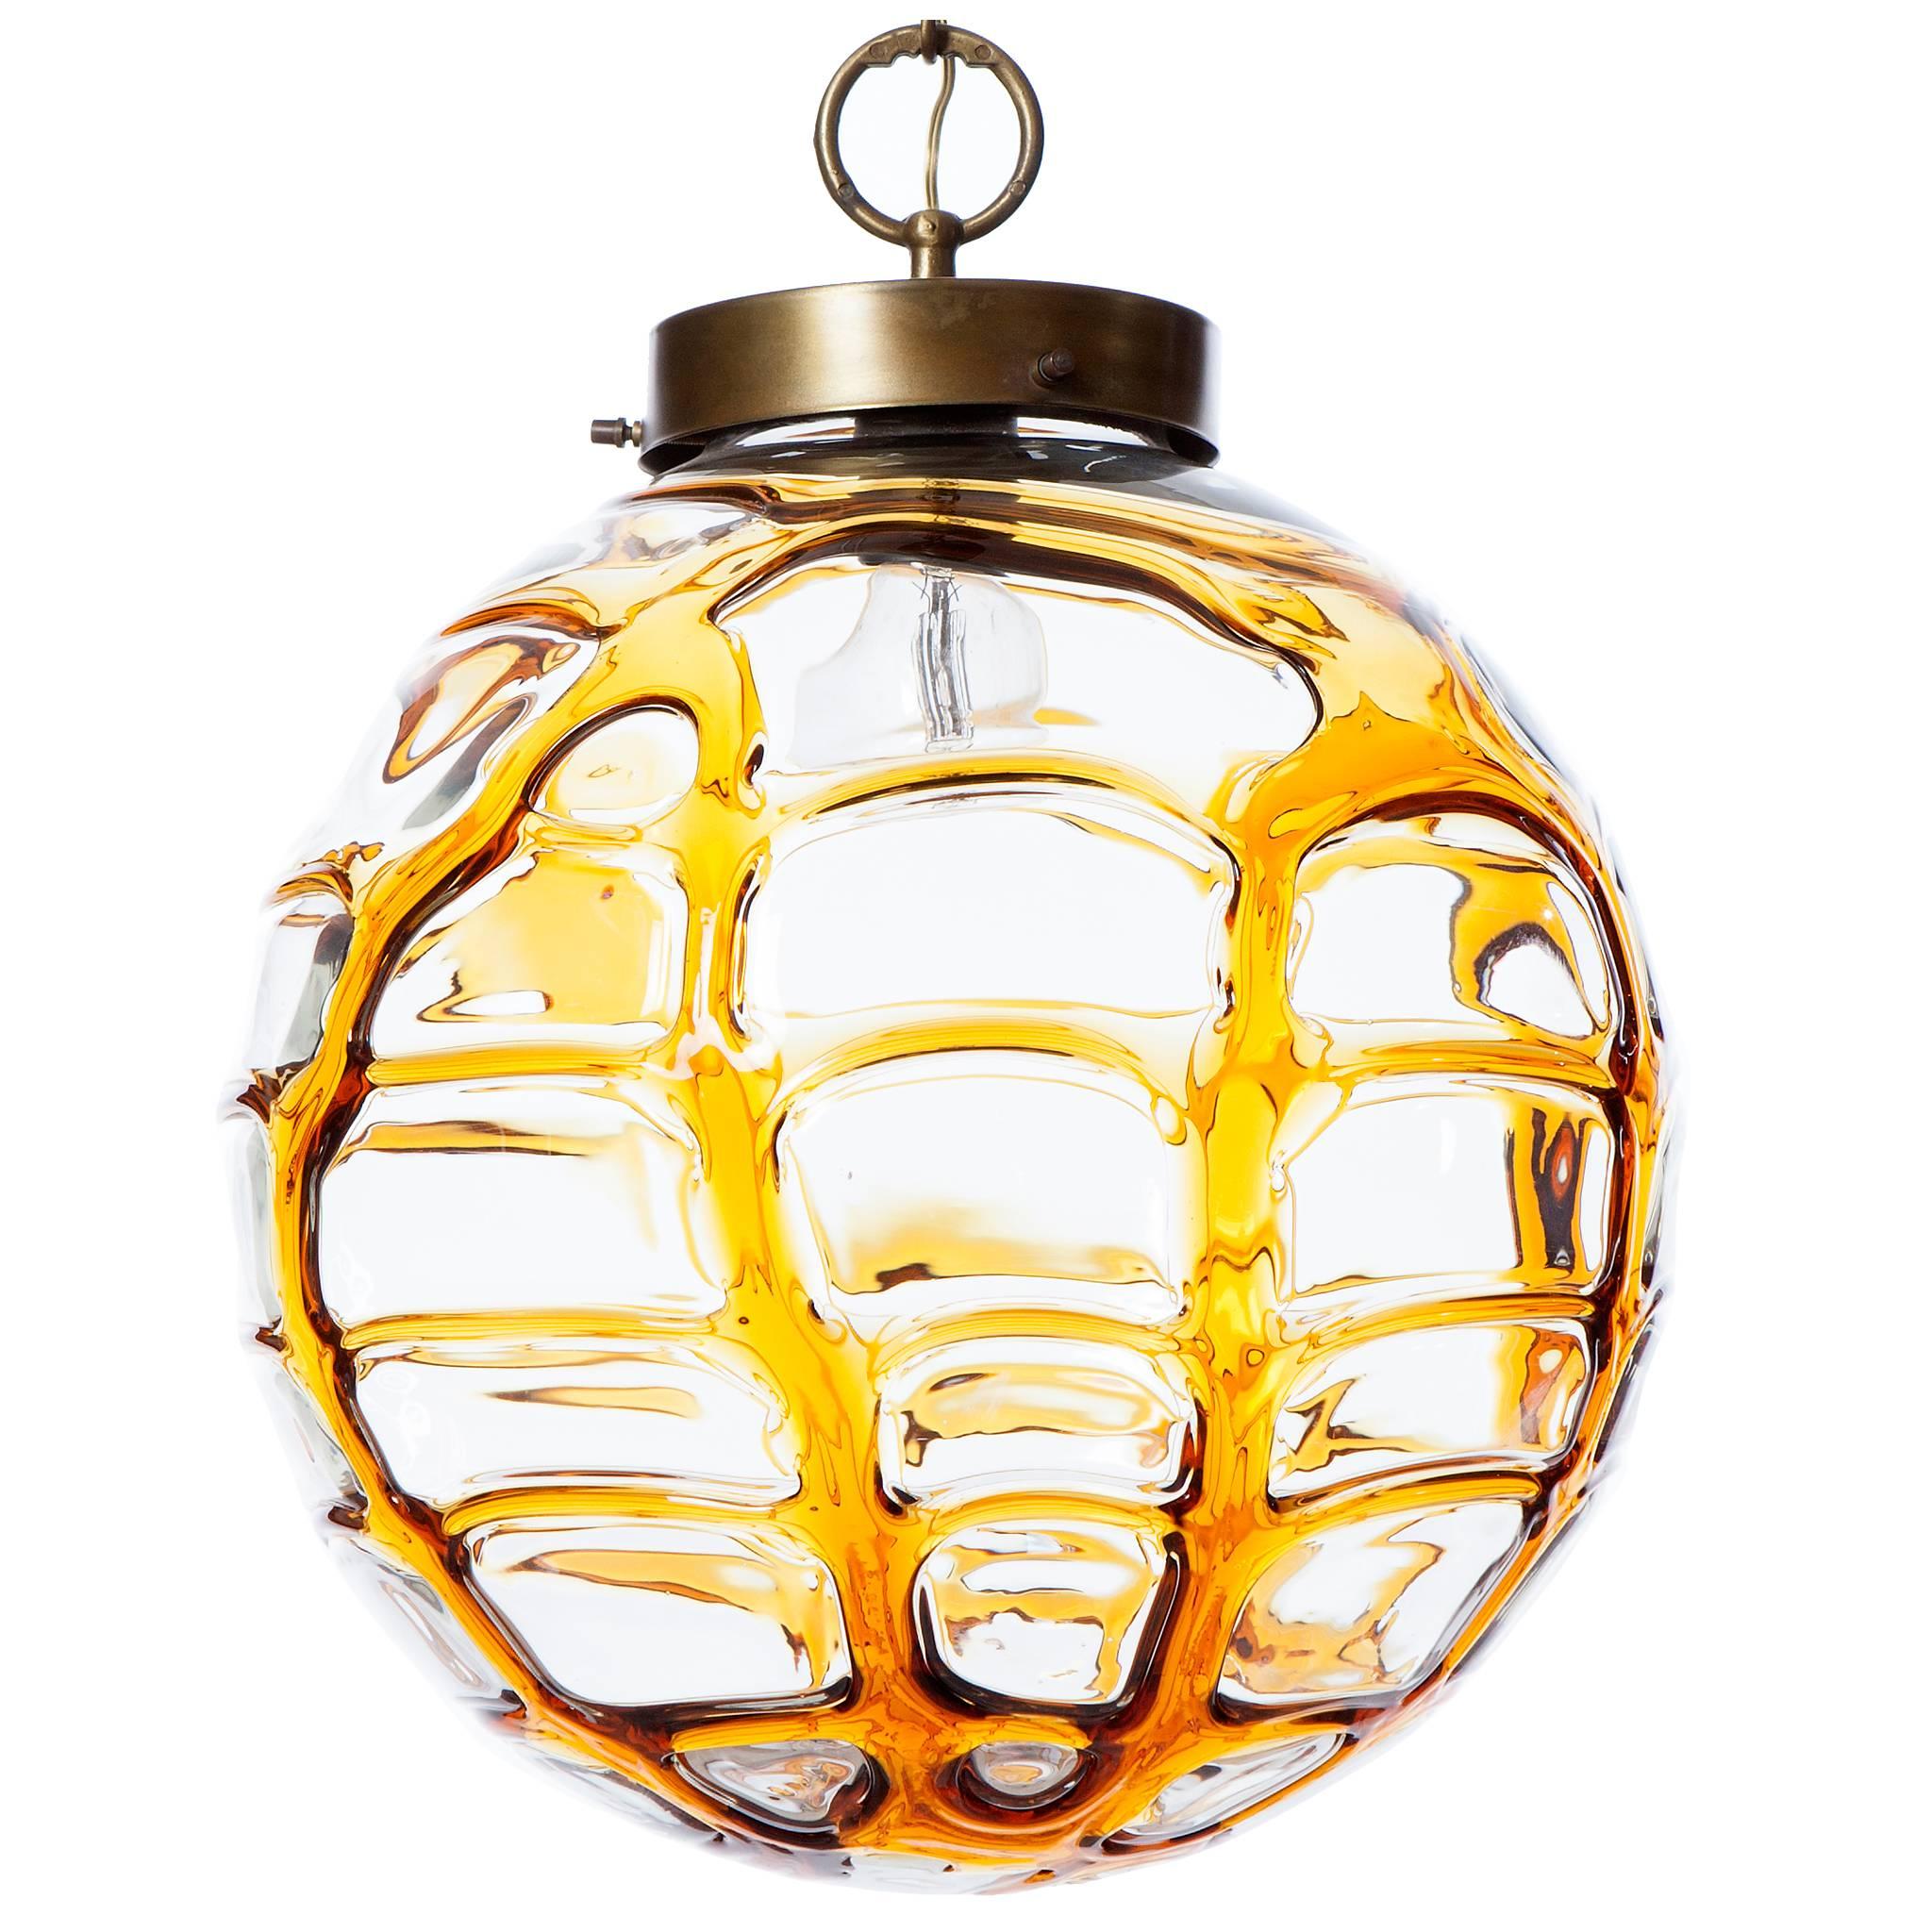 1960s One-of-a-Kind Yellow Pendant Attributed to Doria For Sale